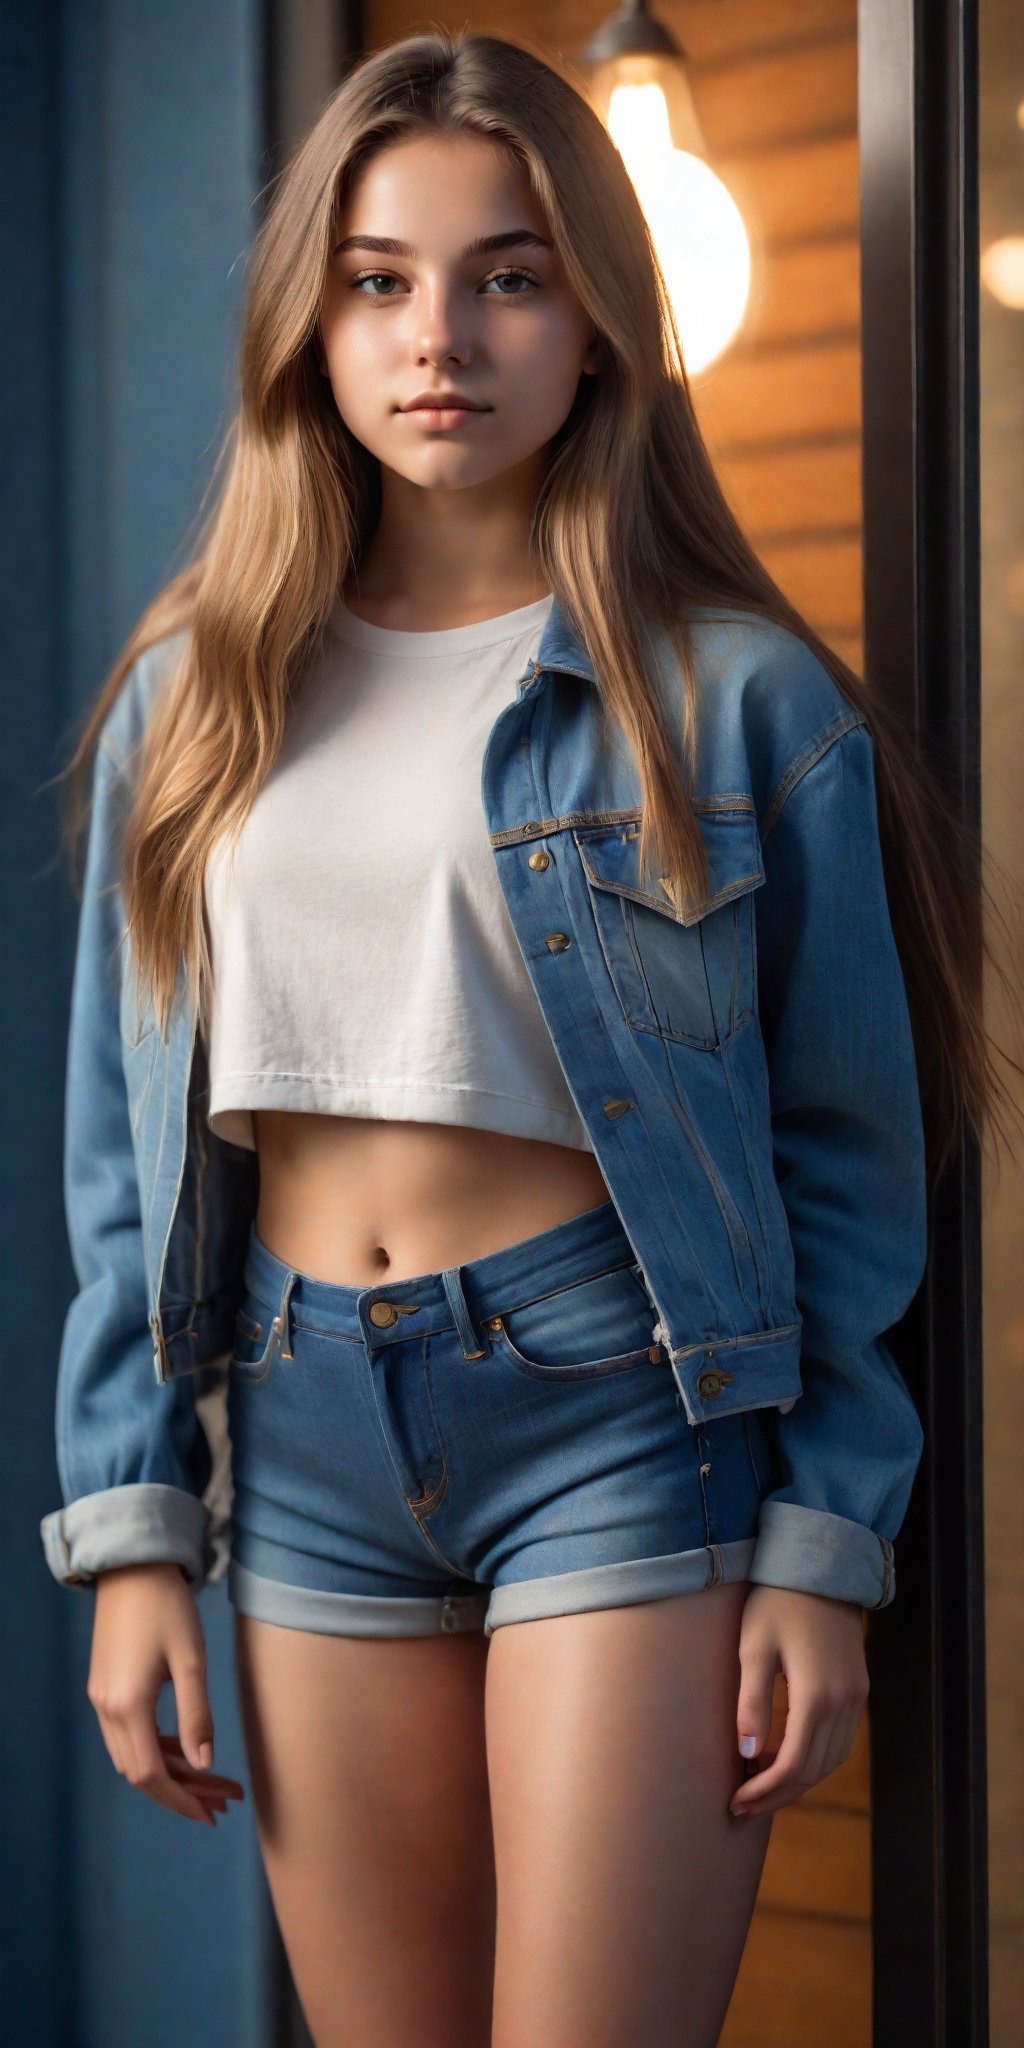 Ultra-detailed portrait of a stunning 19-year-old girl with long hair, posing confidently in an Instagram-inspired pose. Standing tall, she gazes directly into the lens with perfect lighting casting a warm glow on her features. Her denim relaxed shorts are mid-wash blue, accentuating her toned legs and youthful charm. The overall framing is sharp and crisp, showcasing the masterpiece's high resolution and intricate details.